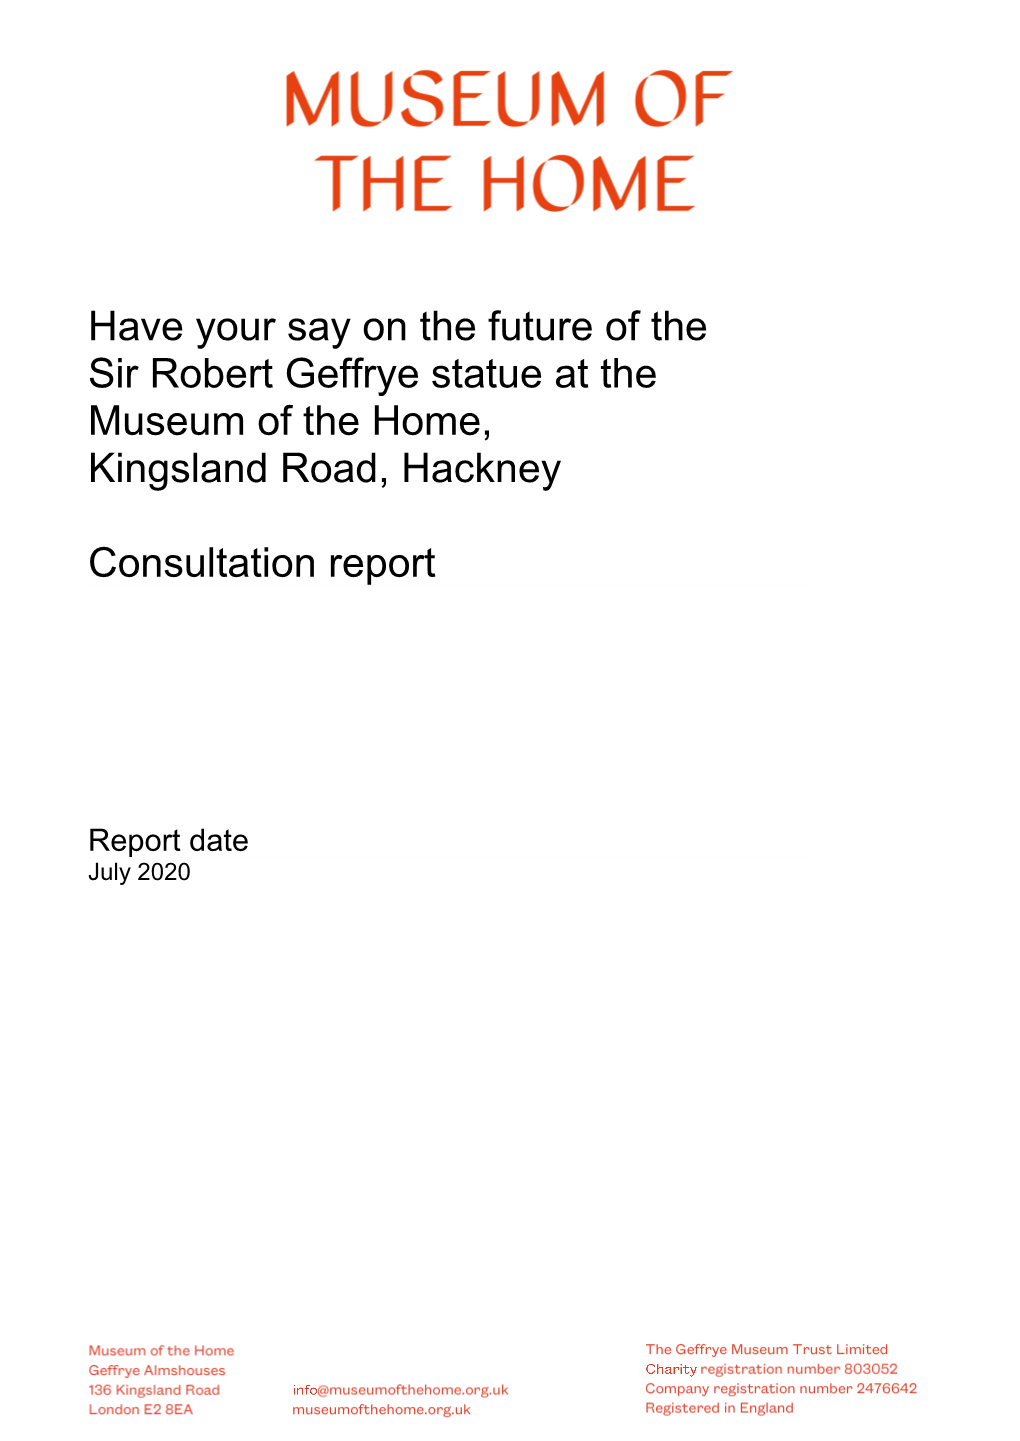 Have Your Say on the Future of the Sir Robert Geffrye Statue at the Museum of the Home, Kingsland Road, Hackney